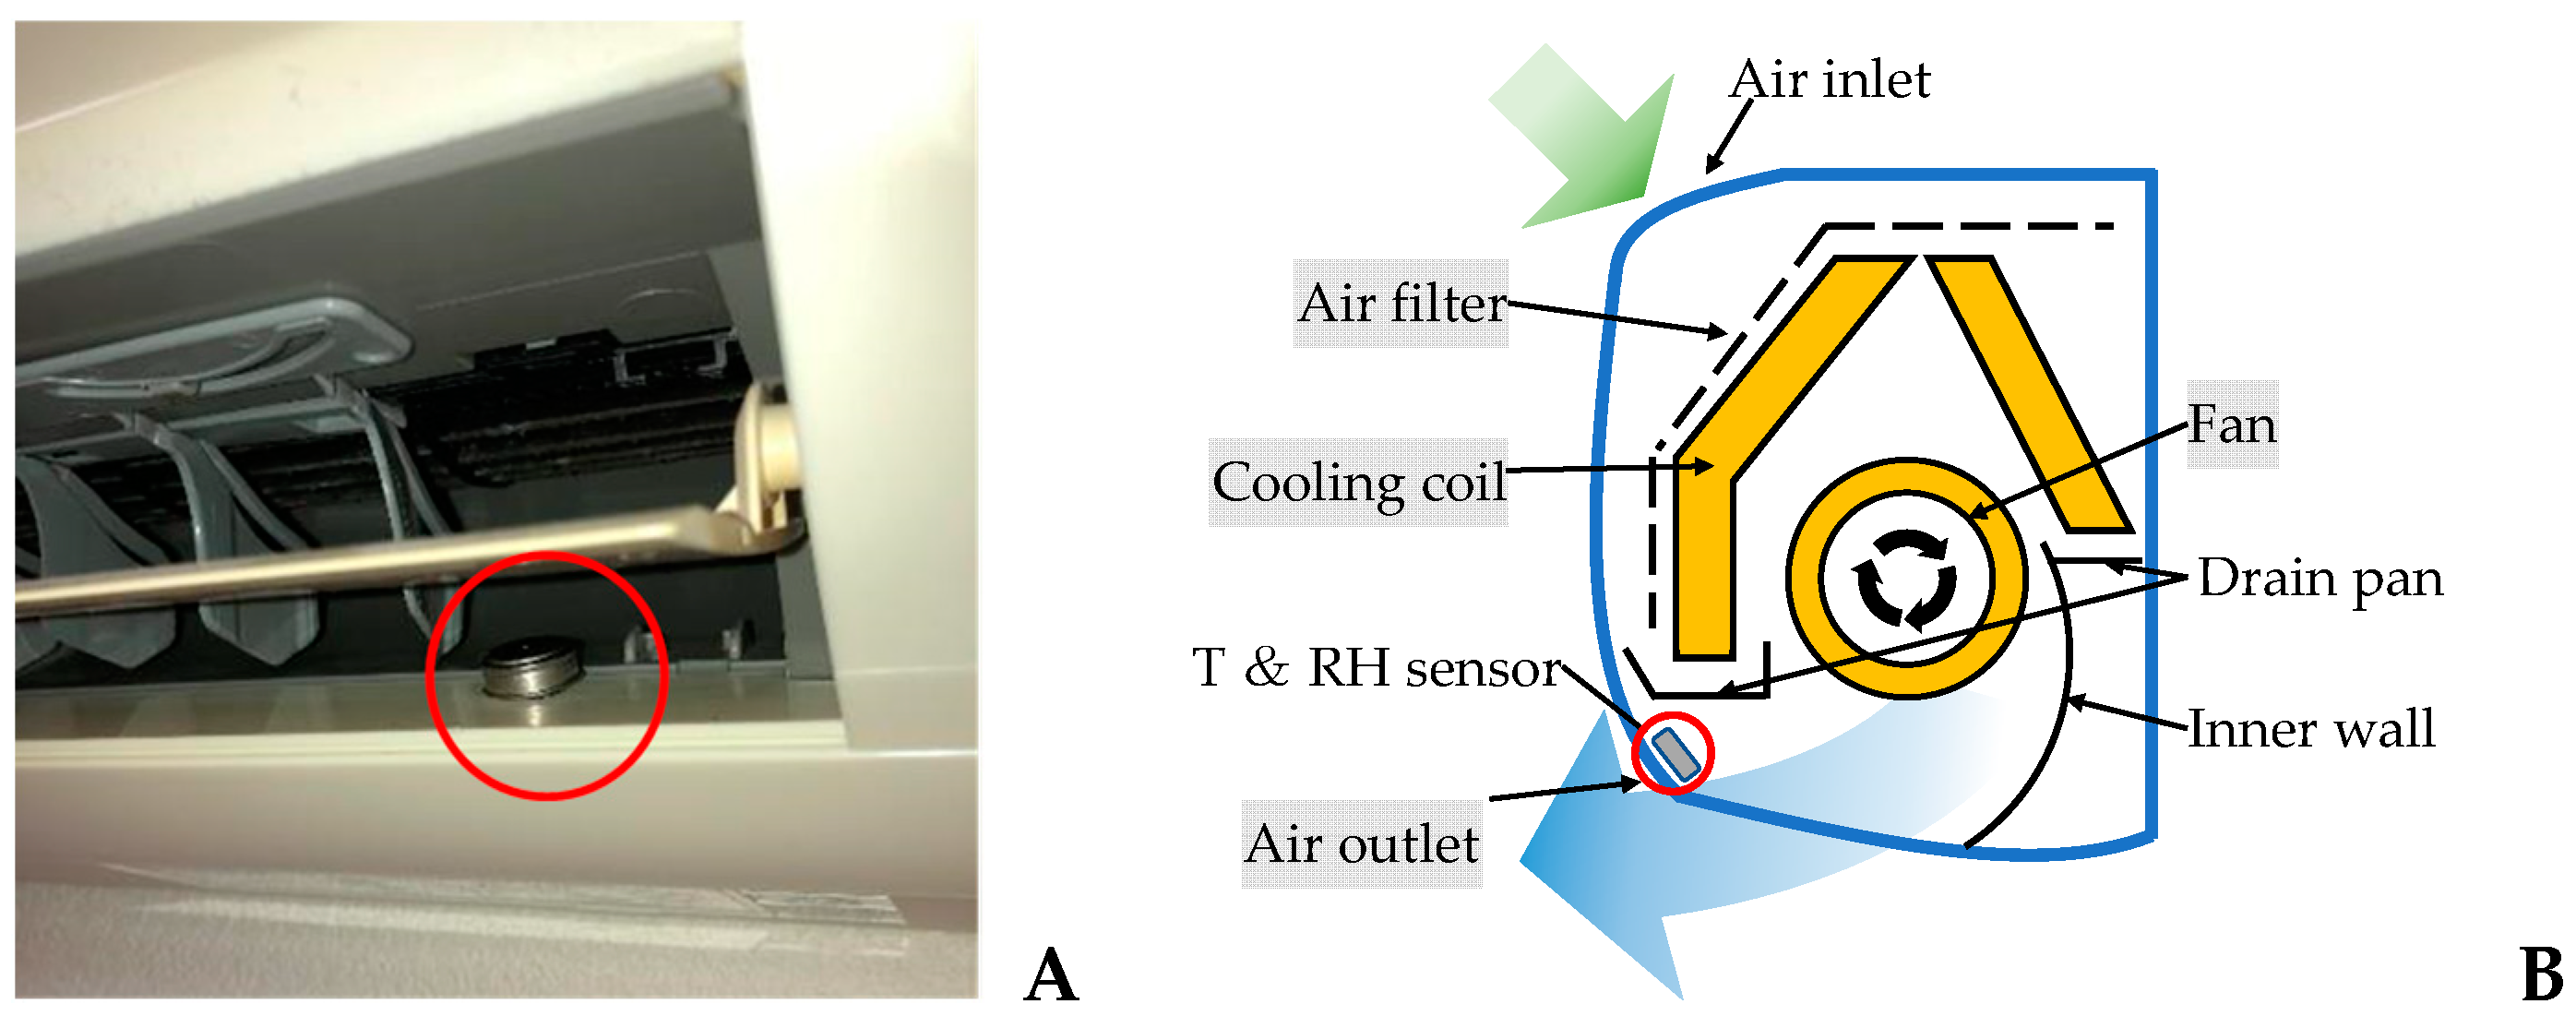 Microorganisms | Free Full-Text | Bacterial Communities in Various Parts of Air-Conditioning  Units in 17 Japanese Houses